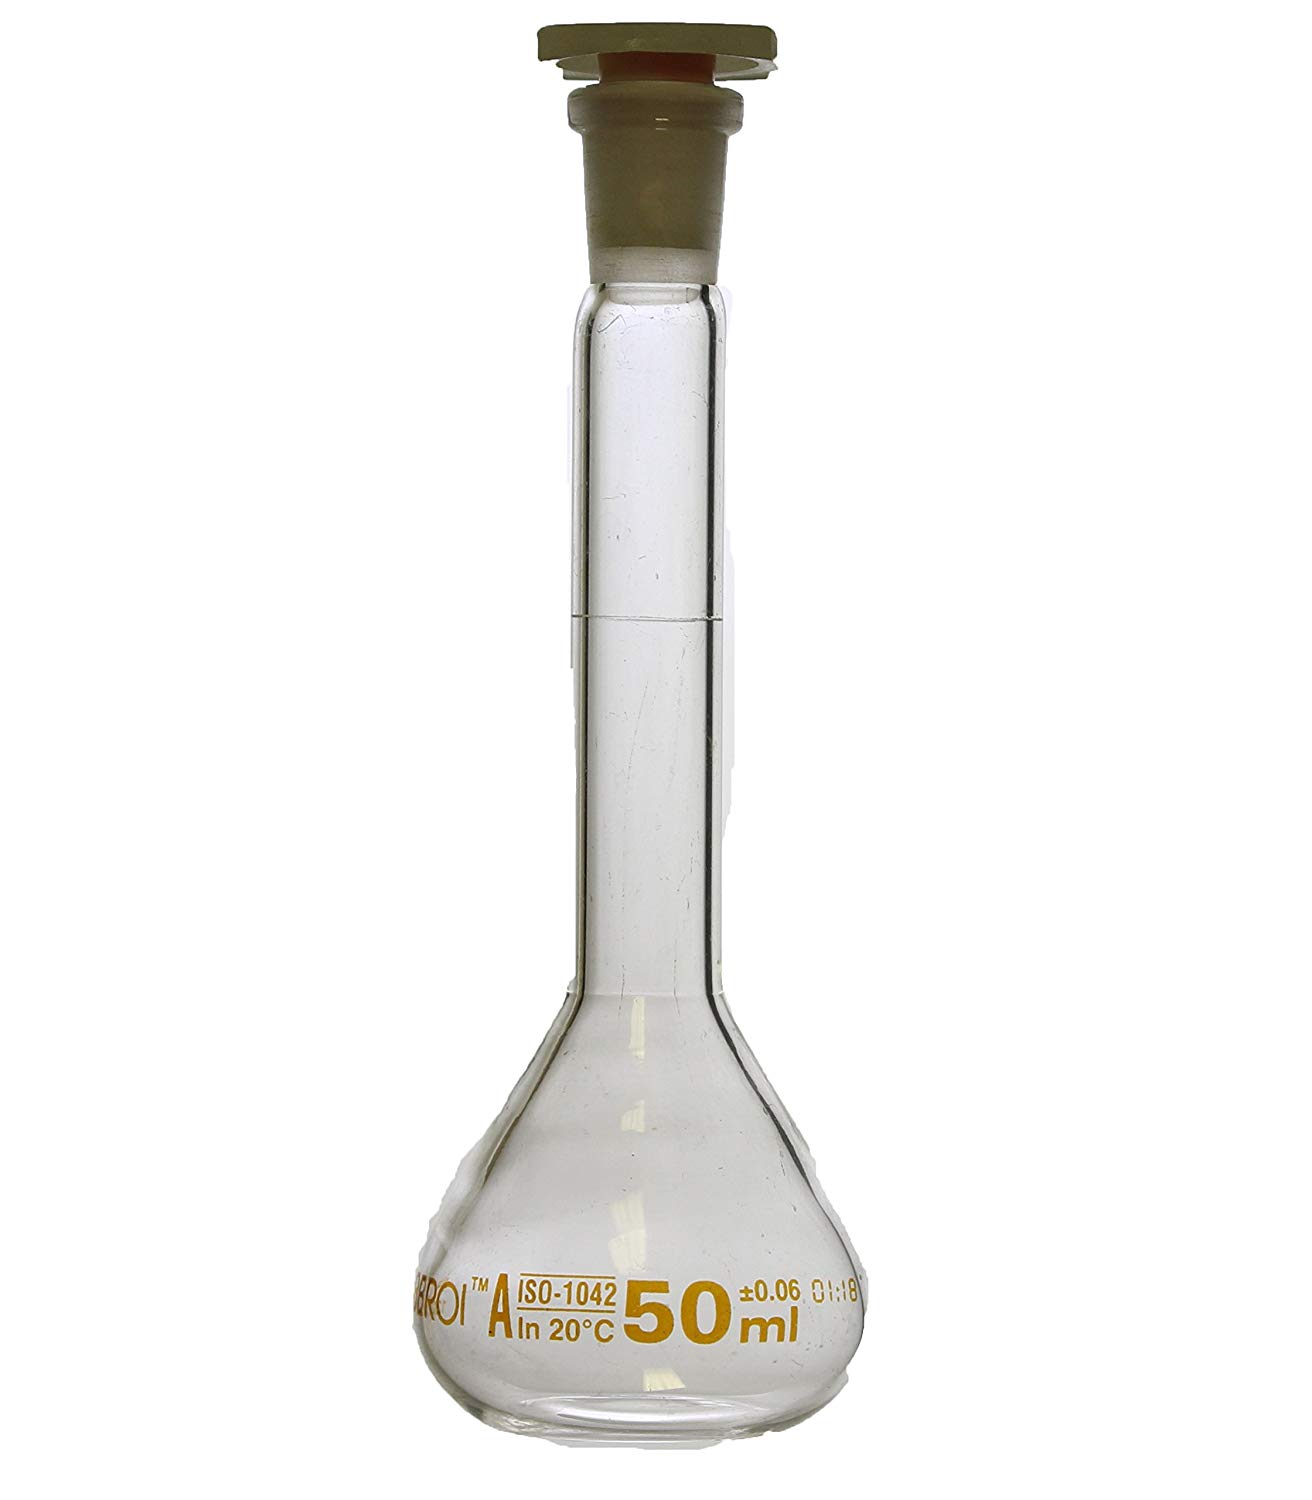 Narrow Mouth CHEM SCIENCE INC 129.602.04 Volumetric Flask Capacity 50 mL with Glass Stopper Size # 9 Sati International Inc. Serialized and Certified with One Graduation Mark Class A 